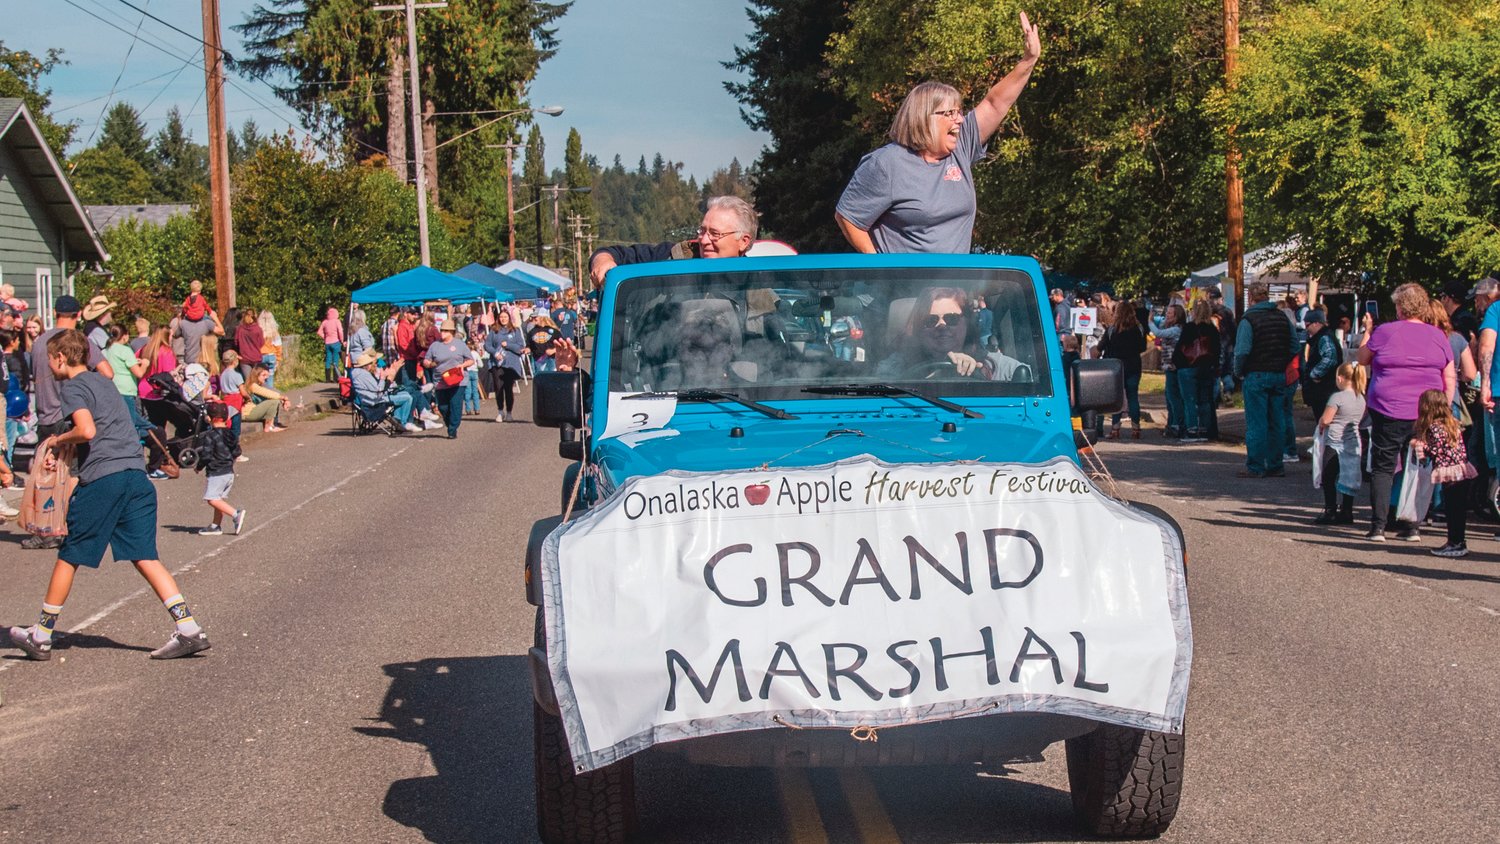 Smiles and waves are exchanged as the Onalaska Apple Harvest Festival Grand Marshal rolls through town during a parade Saturday morning.